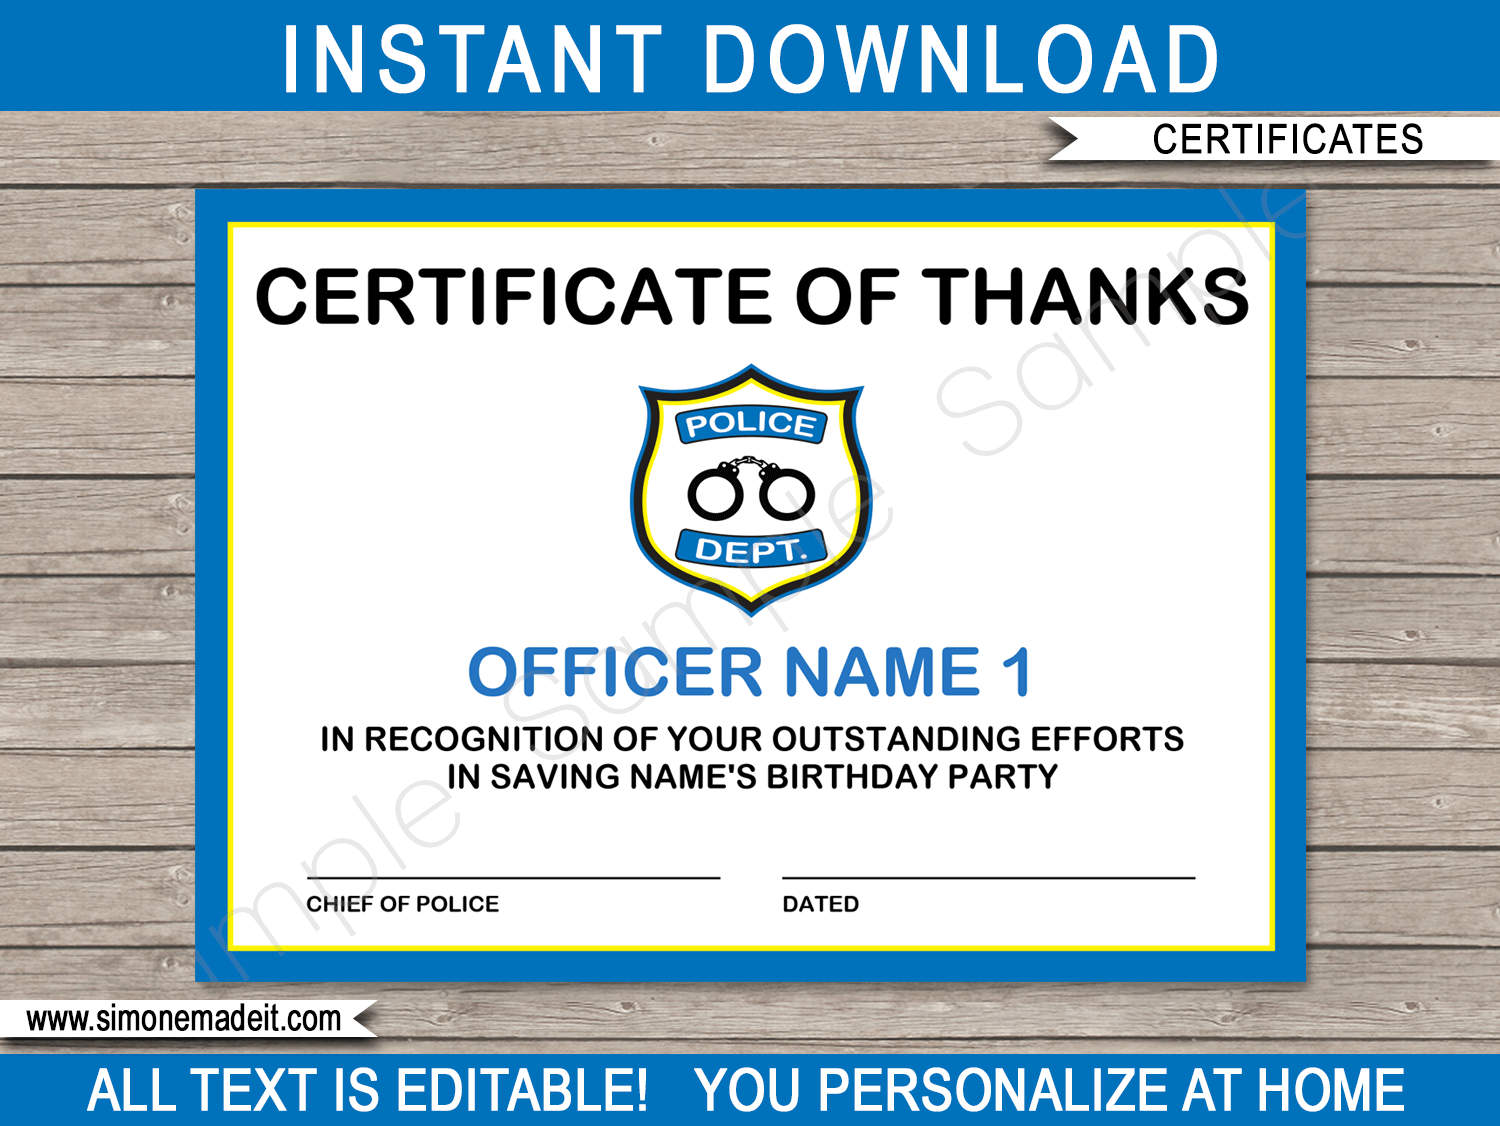 Printable Police Officer Certificate Template | Certificate of Thanks | Police Theme Birthday Party Games or Decorations | $3.00 INSTANT DOWNLOAD via simonemadeit.com